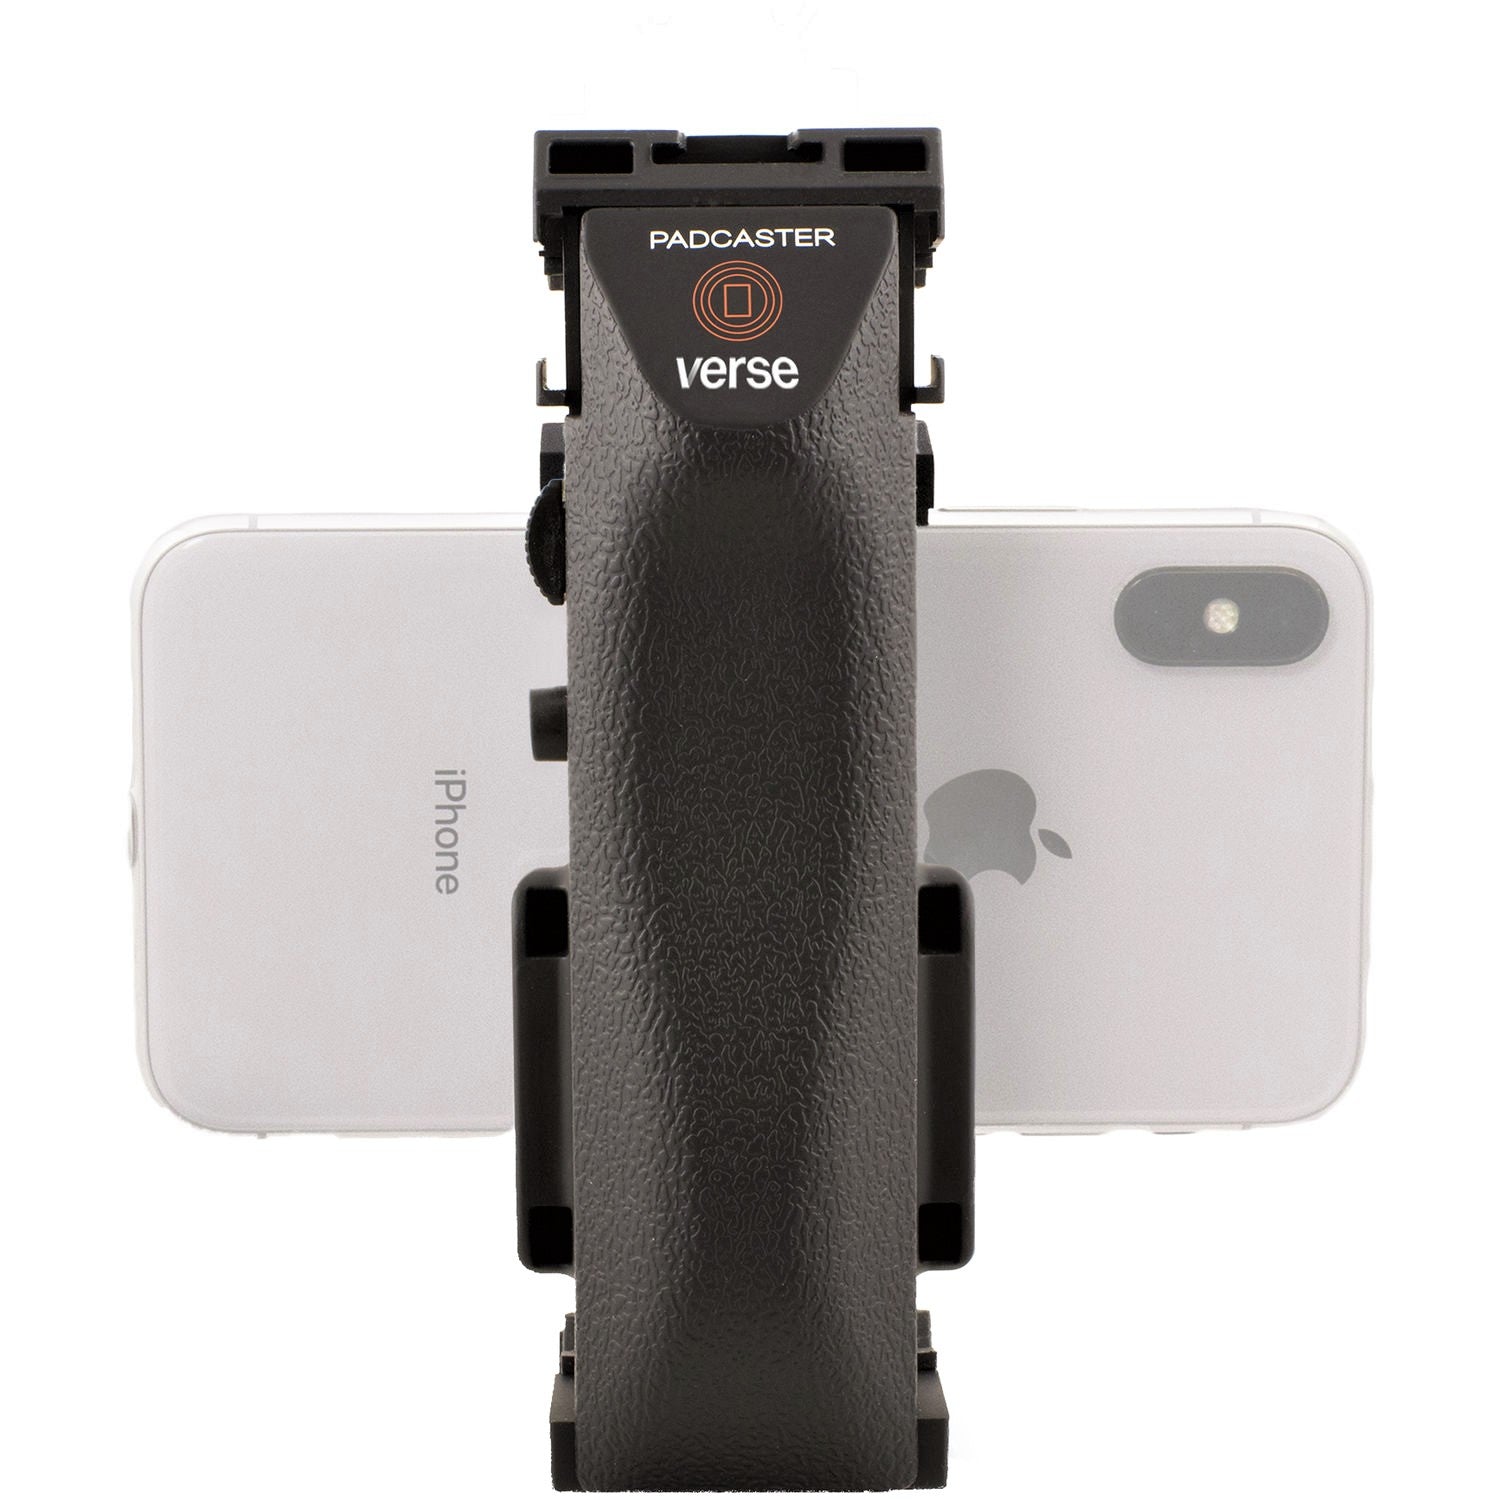 Mobile Phone Attached to Padcaster Verse Grip 